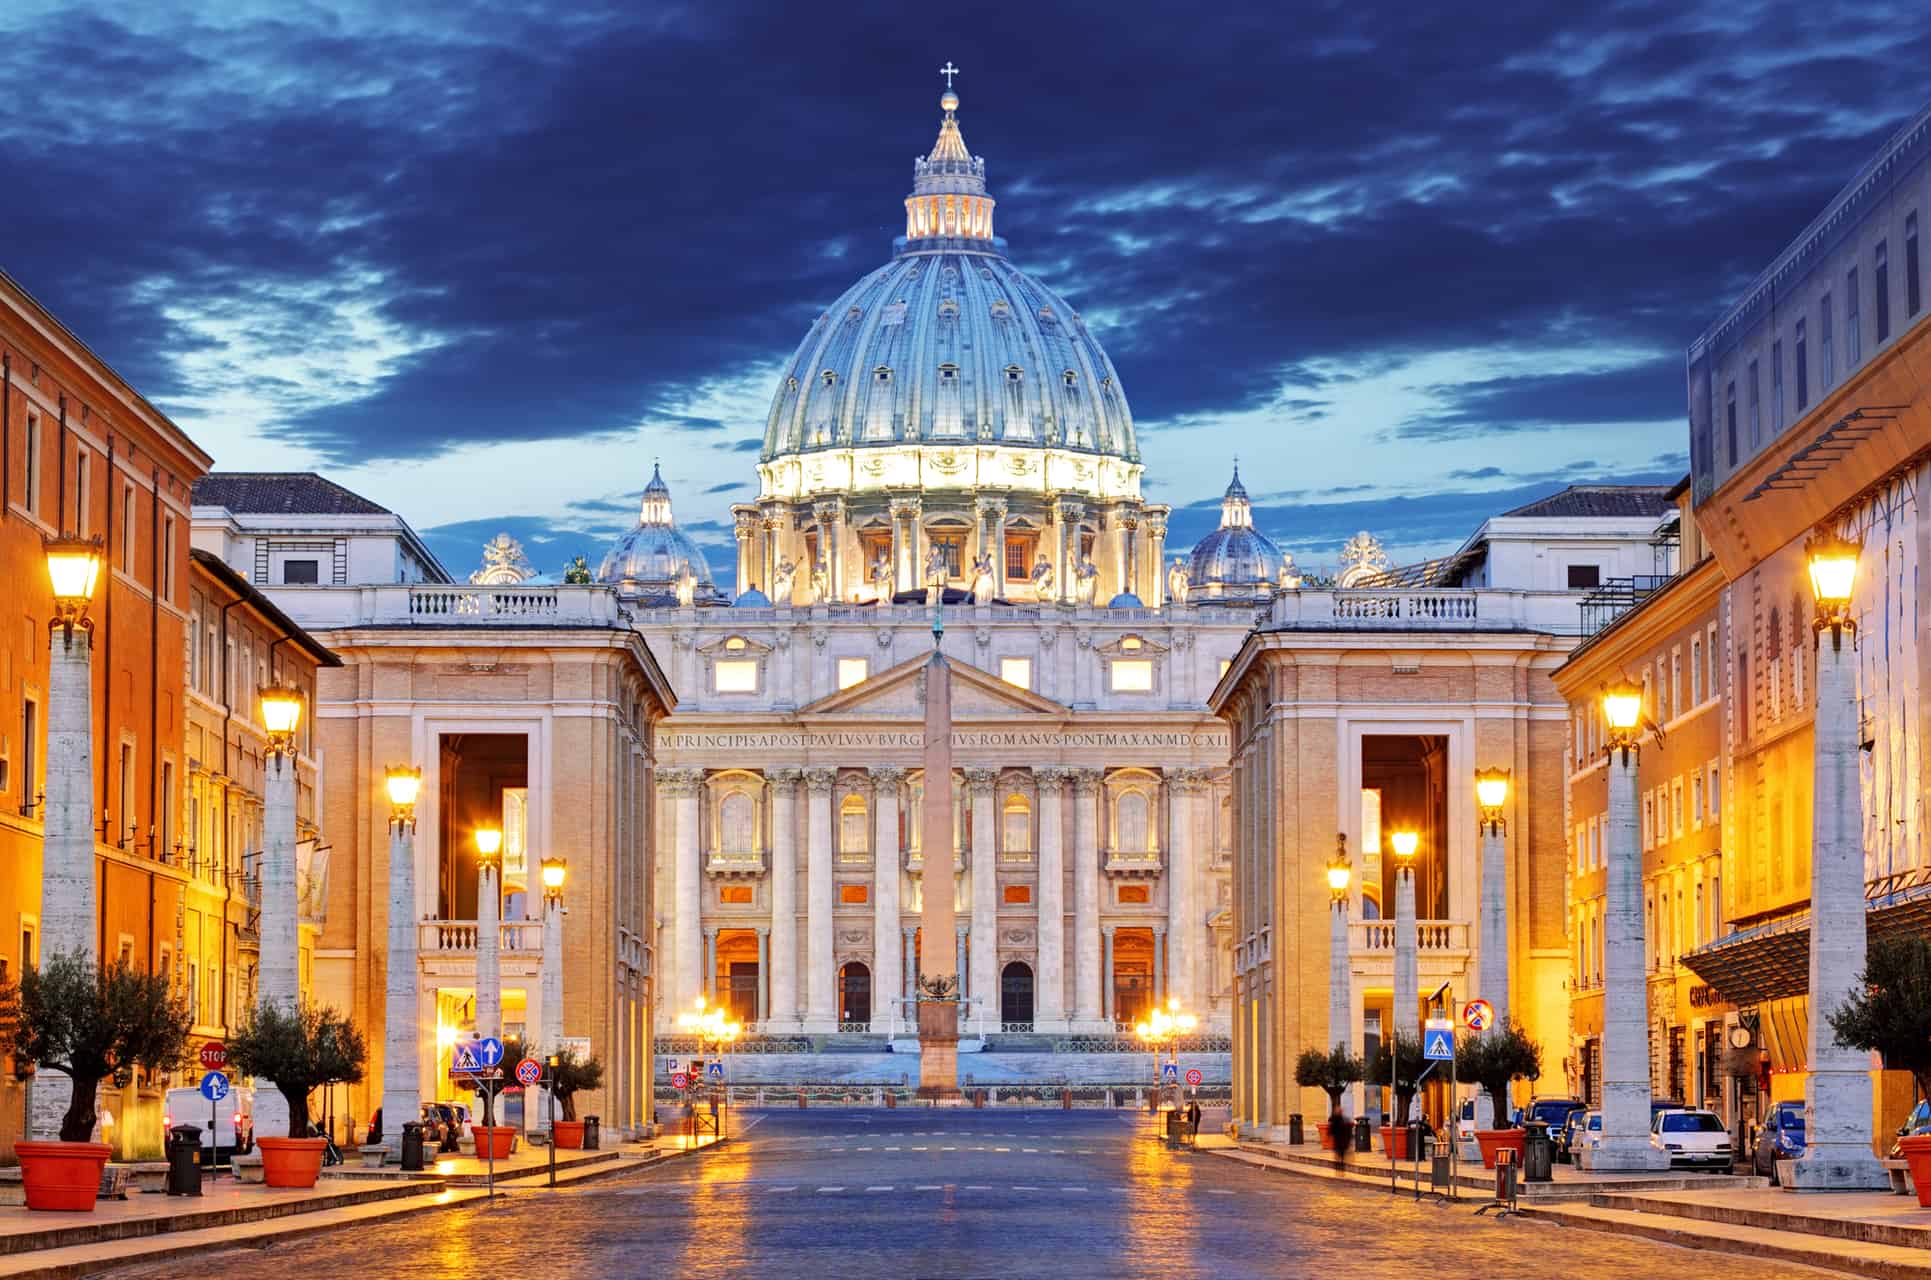 The Papal Basilica Of Saint Peter In The Vatican